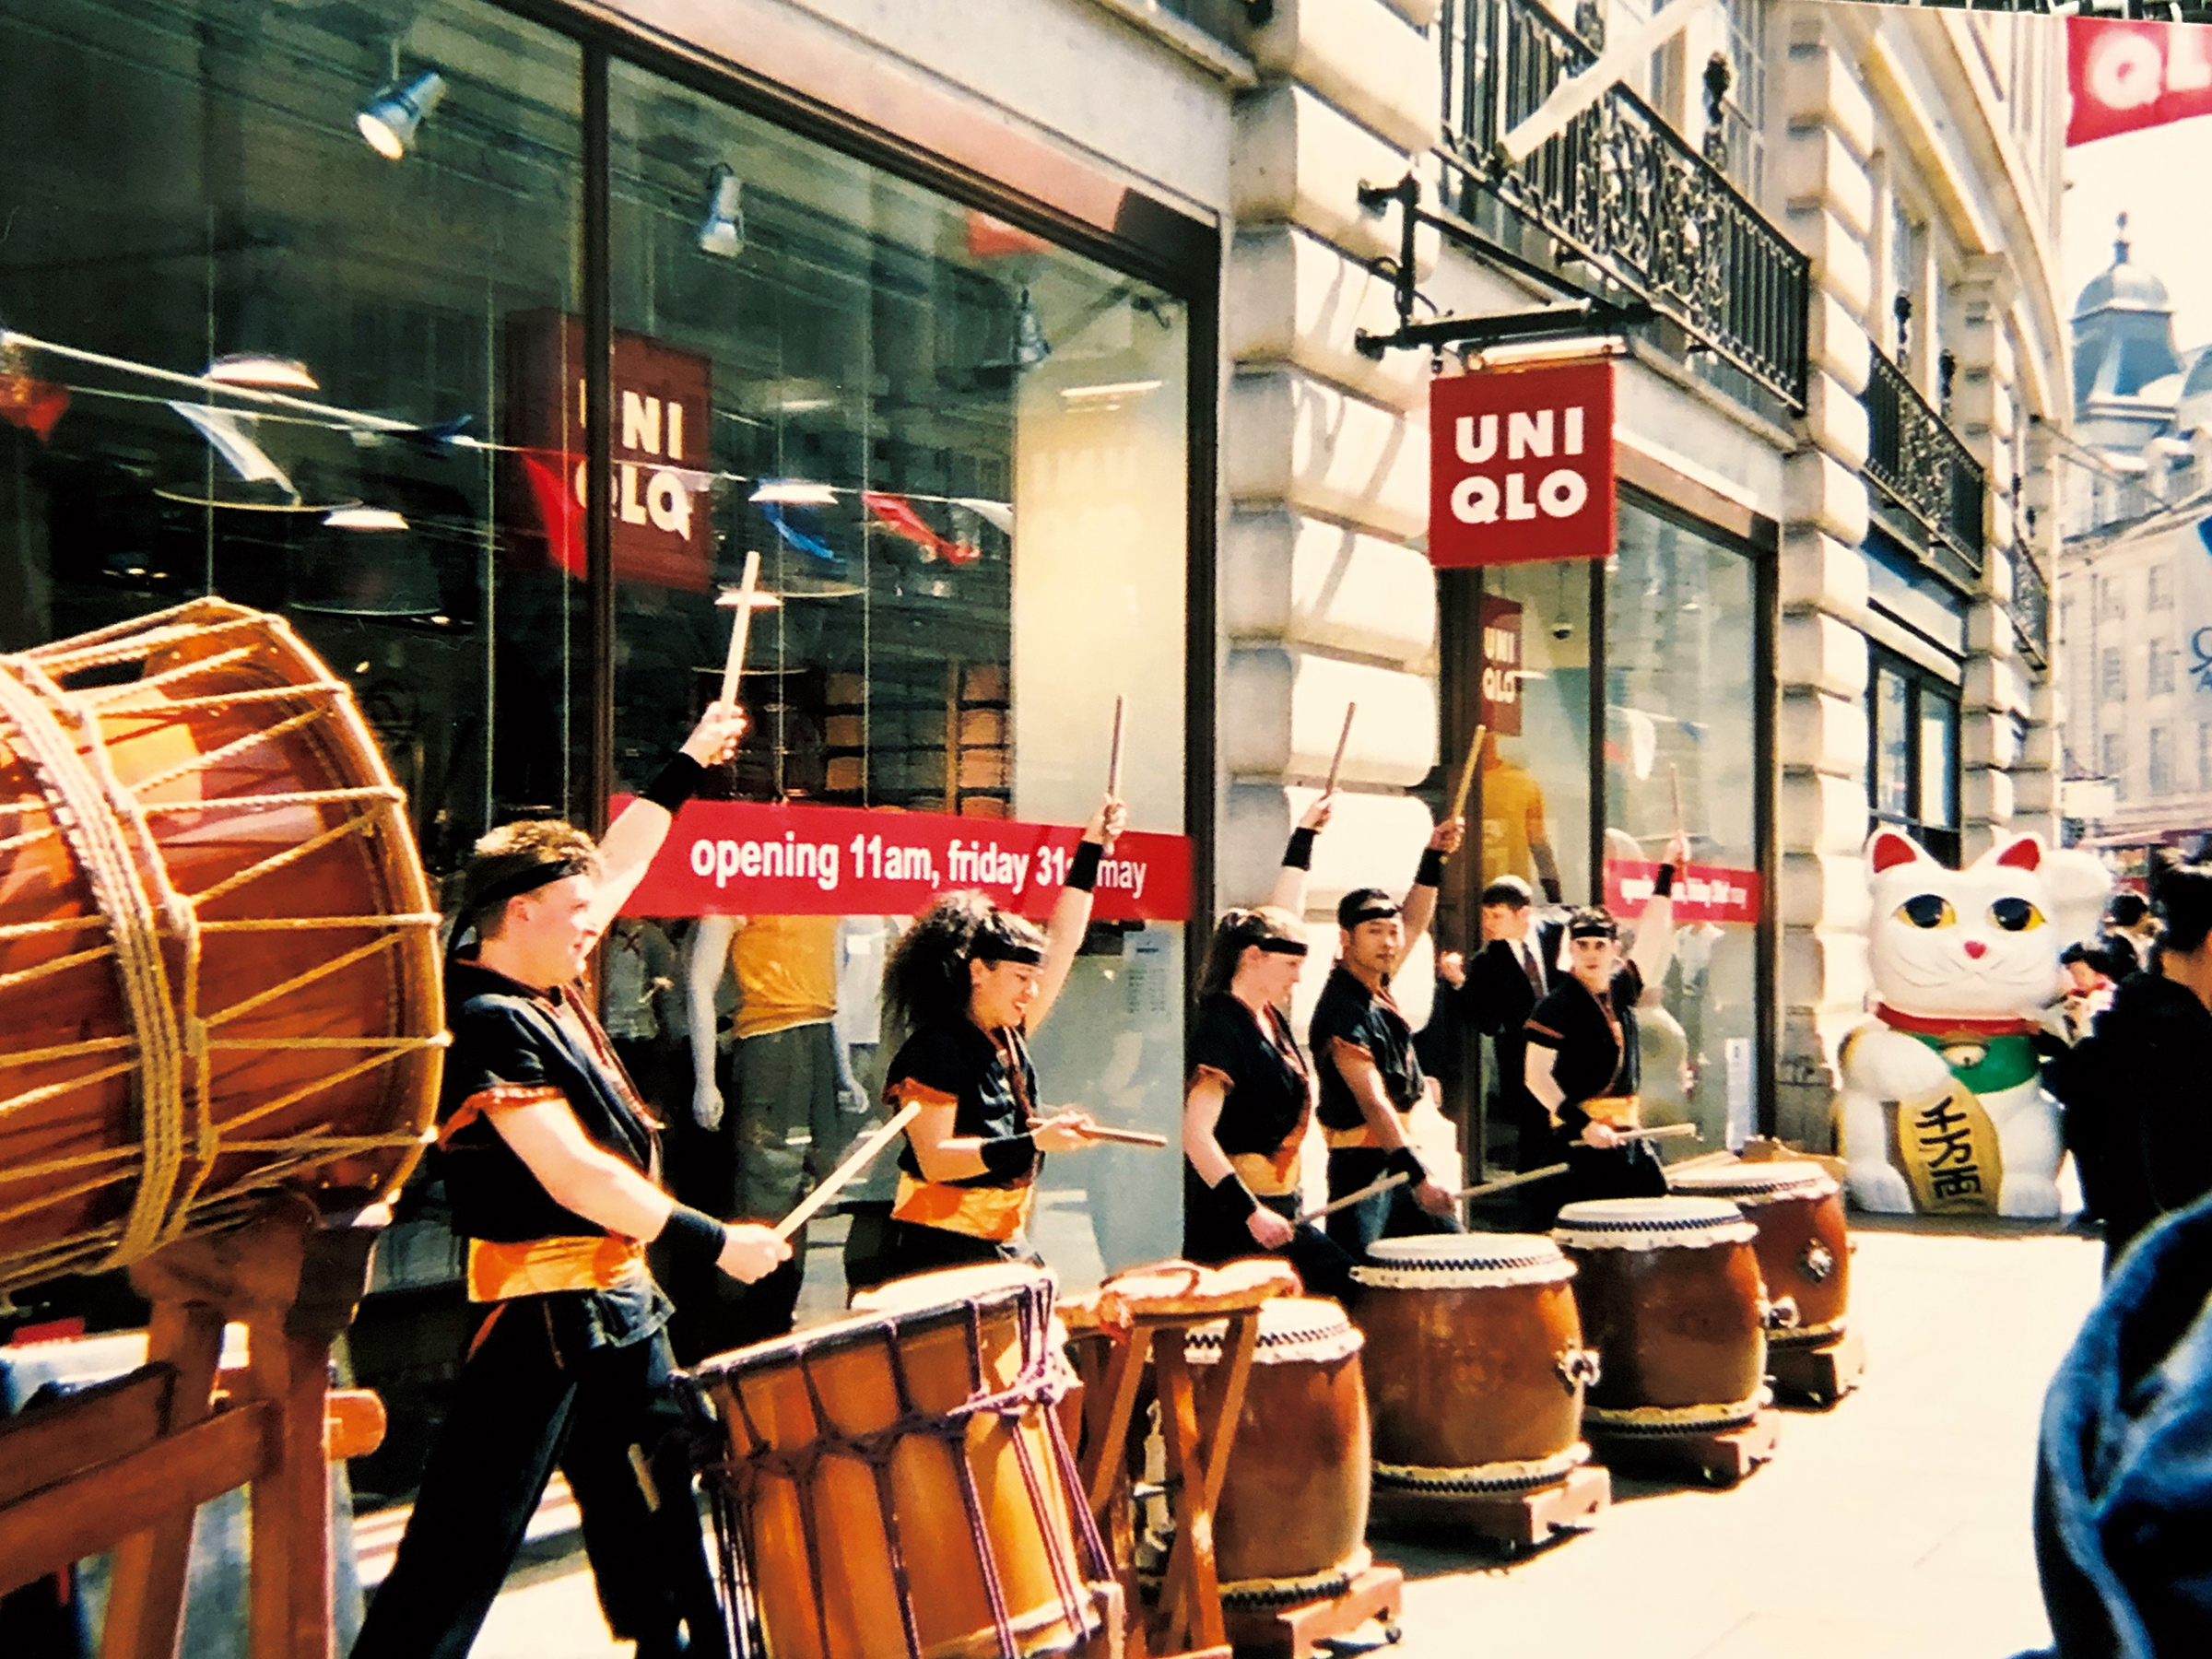 The 2001 opening of a new Uniqlo store in London. Uniqlo made its first attempt at overseas expansion that year, opening four stores in London. (Courtesy Uniqlo)